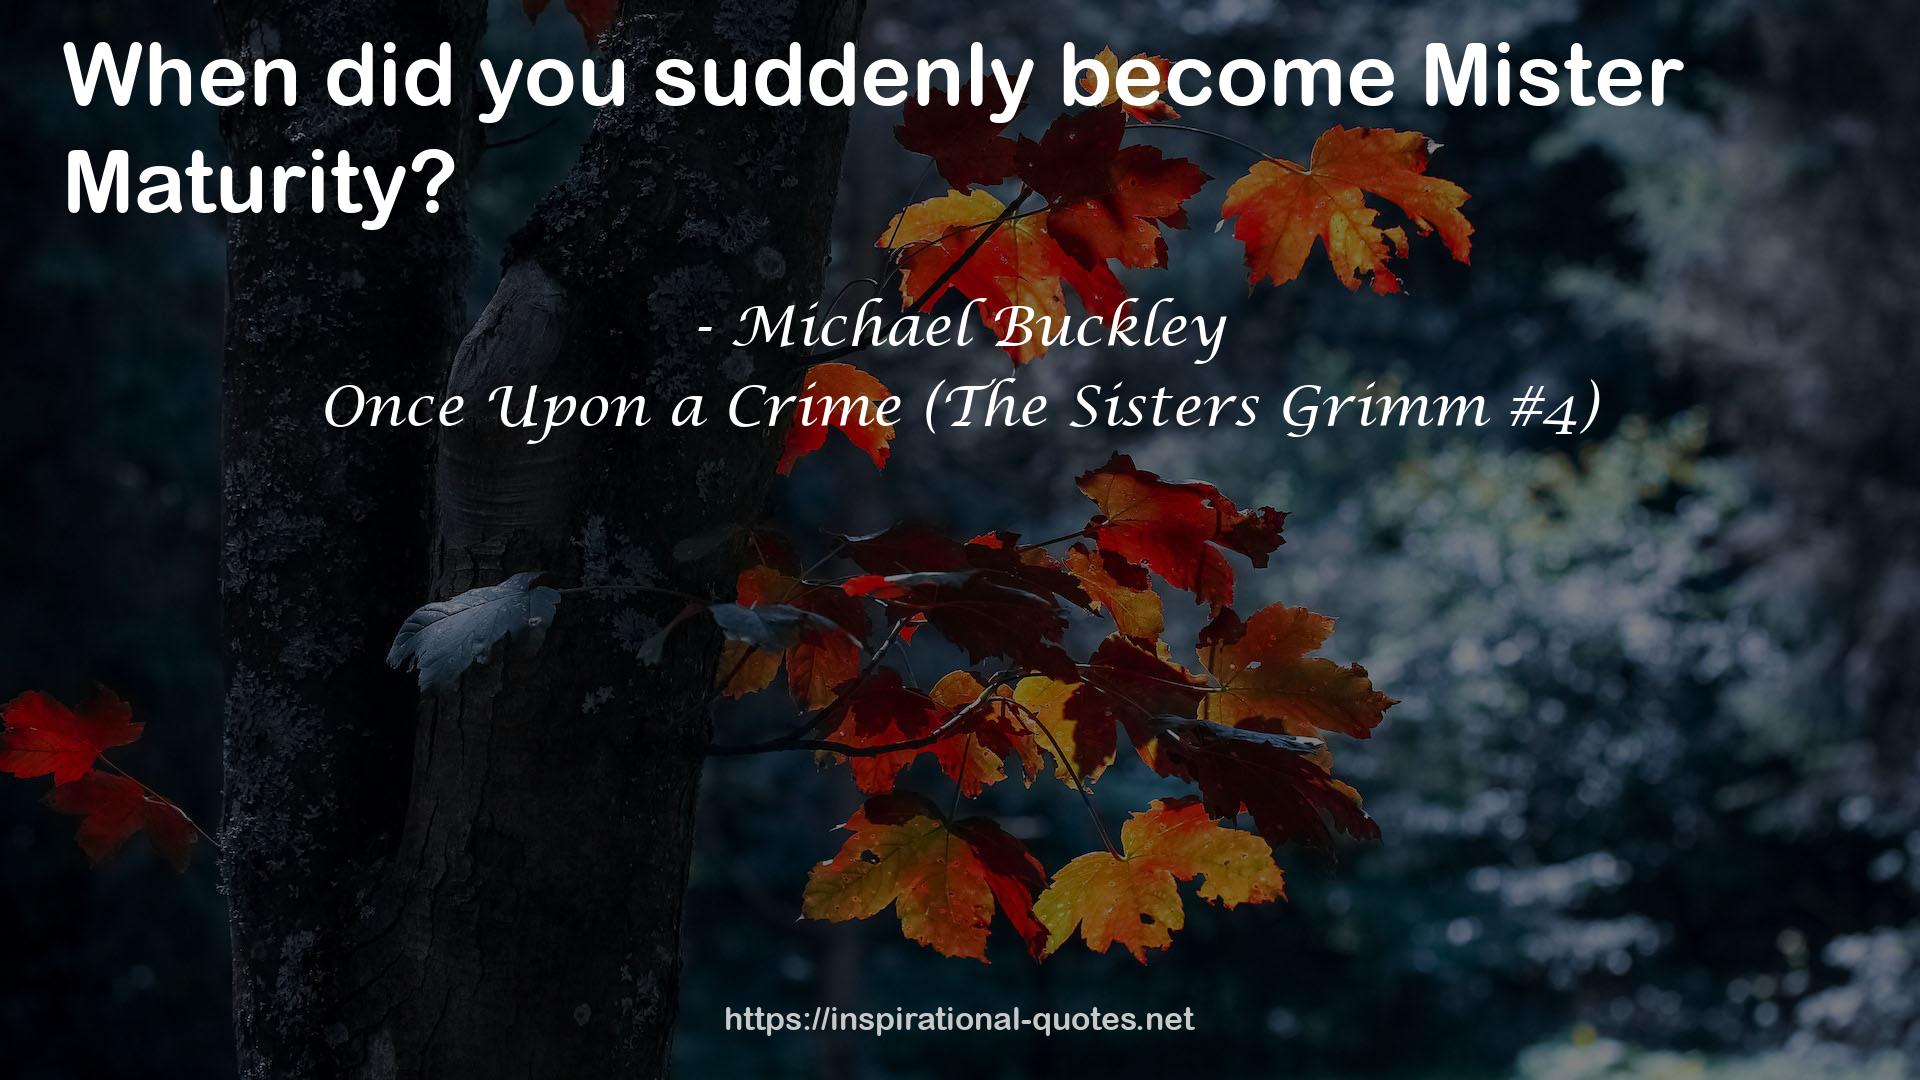 Once Upon a Crime (The Sisters Grimm #4) QUOTES